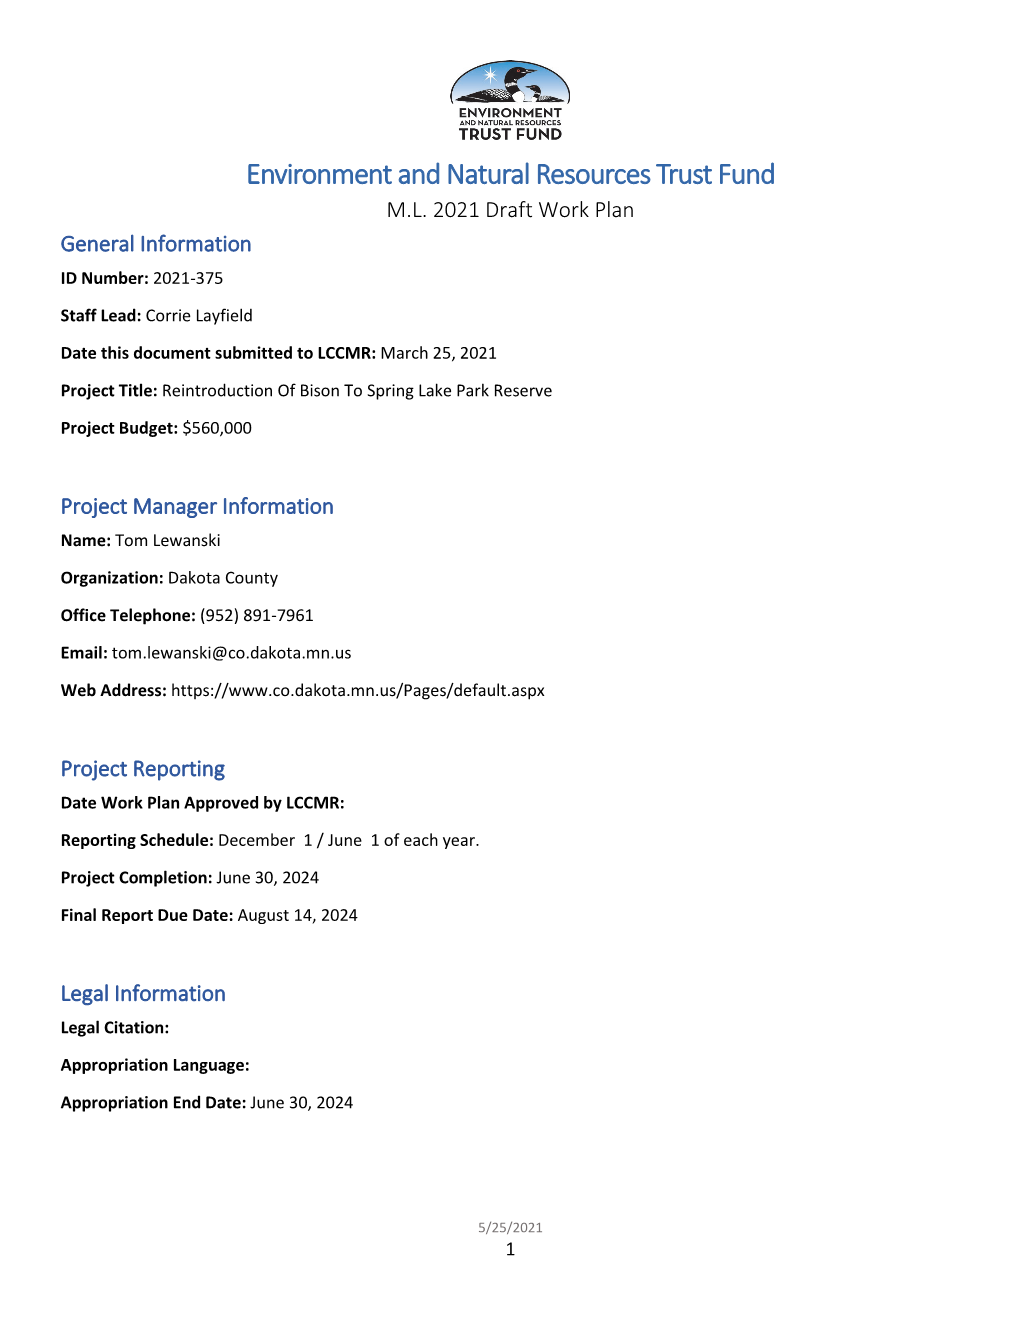 Environment and Natural Resources Trust Fund M.L